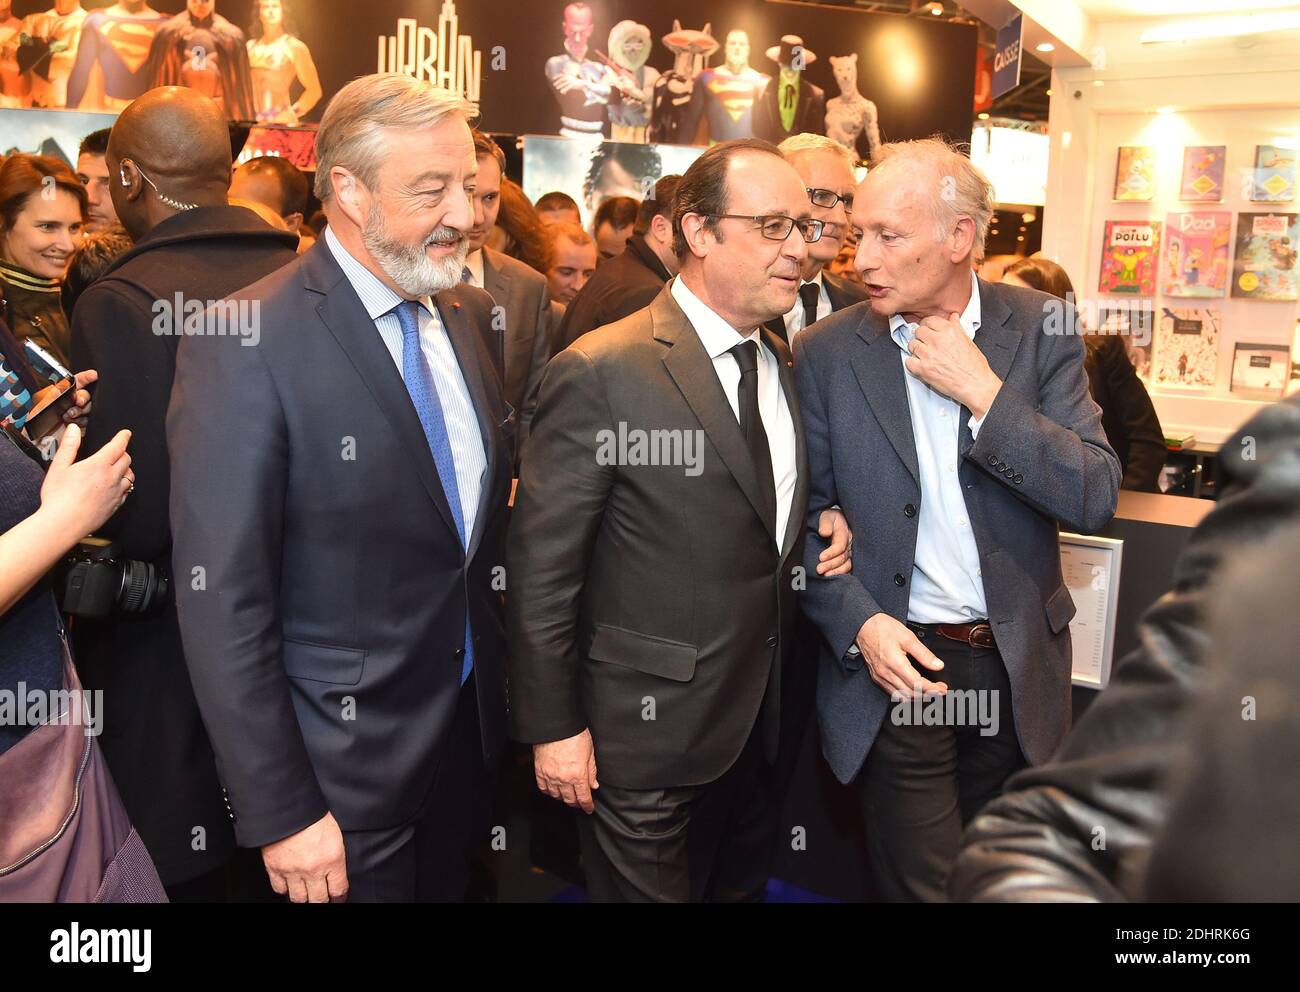 French President Francois Hollande along with Syndicat National de l'Edition SNE (National Edition Federation) President Vincent Montagne officially opens the 36th Salon du Livre (renamed 'Livre Paris'), the annual Paris book fair held at Paris Expo Porte de Versailles in Paris, France on March 17, 2016. South Korea is this year's guest of honor of the book fair as the country celebrates the 130th anniversary of diplomatic ties with France. Photo by Christian Liewig/ABACAPRESS.COM Stock Photo